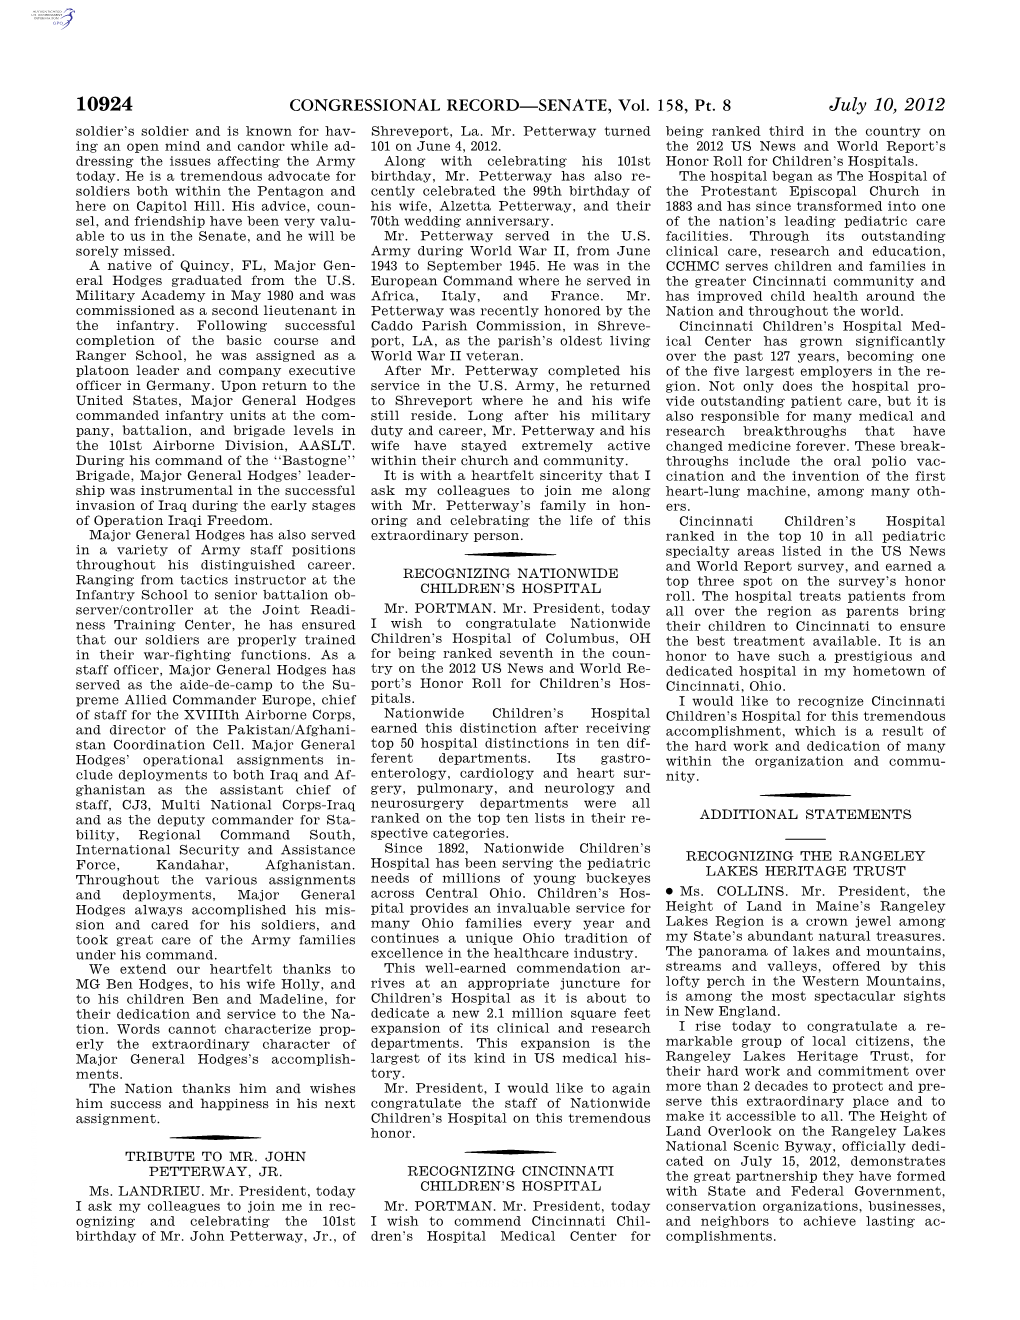 CONGRESSIONAL RECORD—SENATE, Vol. 158, Pt. 8 July 10, 2012 Soldier’S Soldier and Is Known for Hav- Shreveport, La